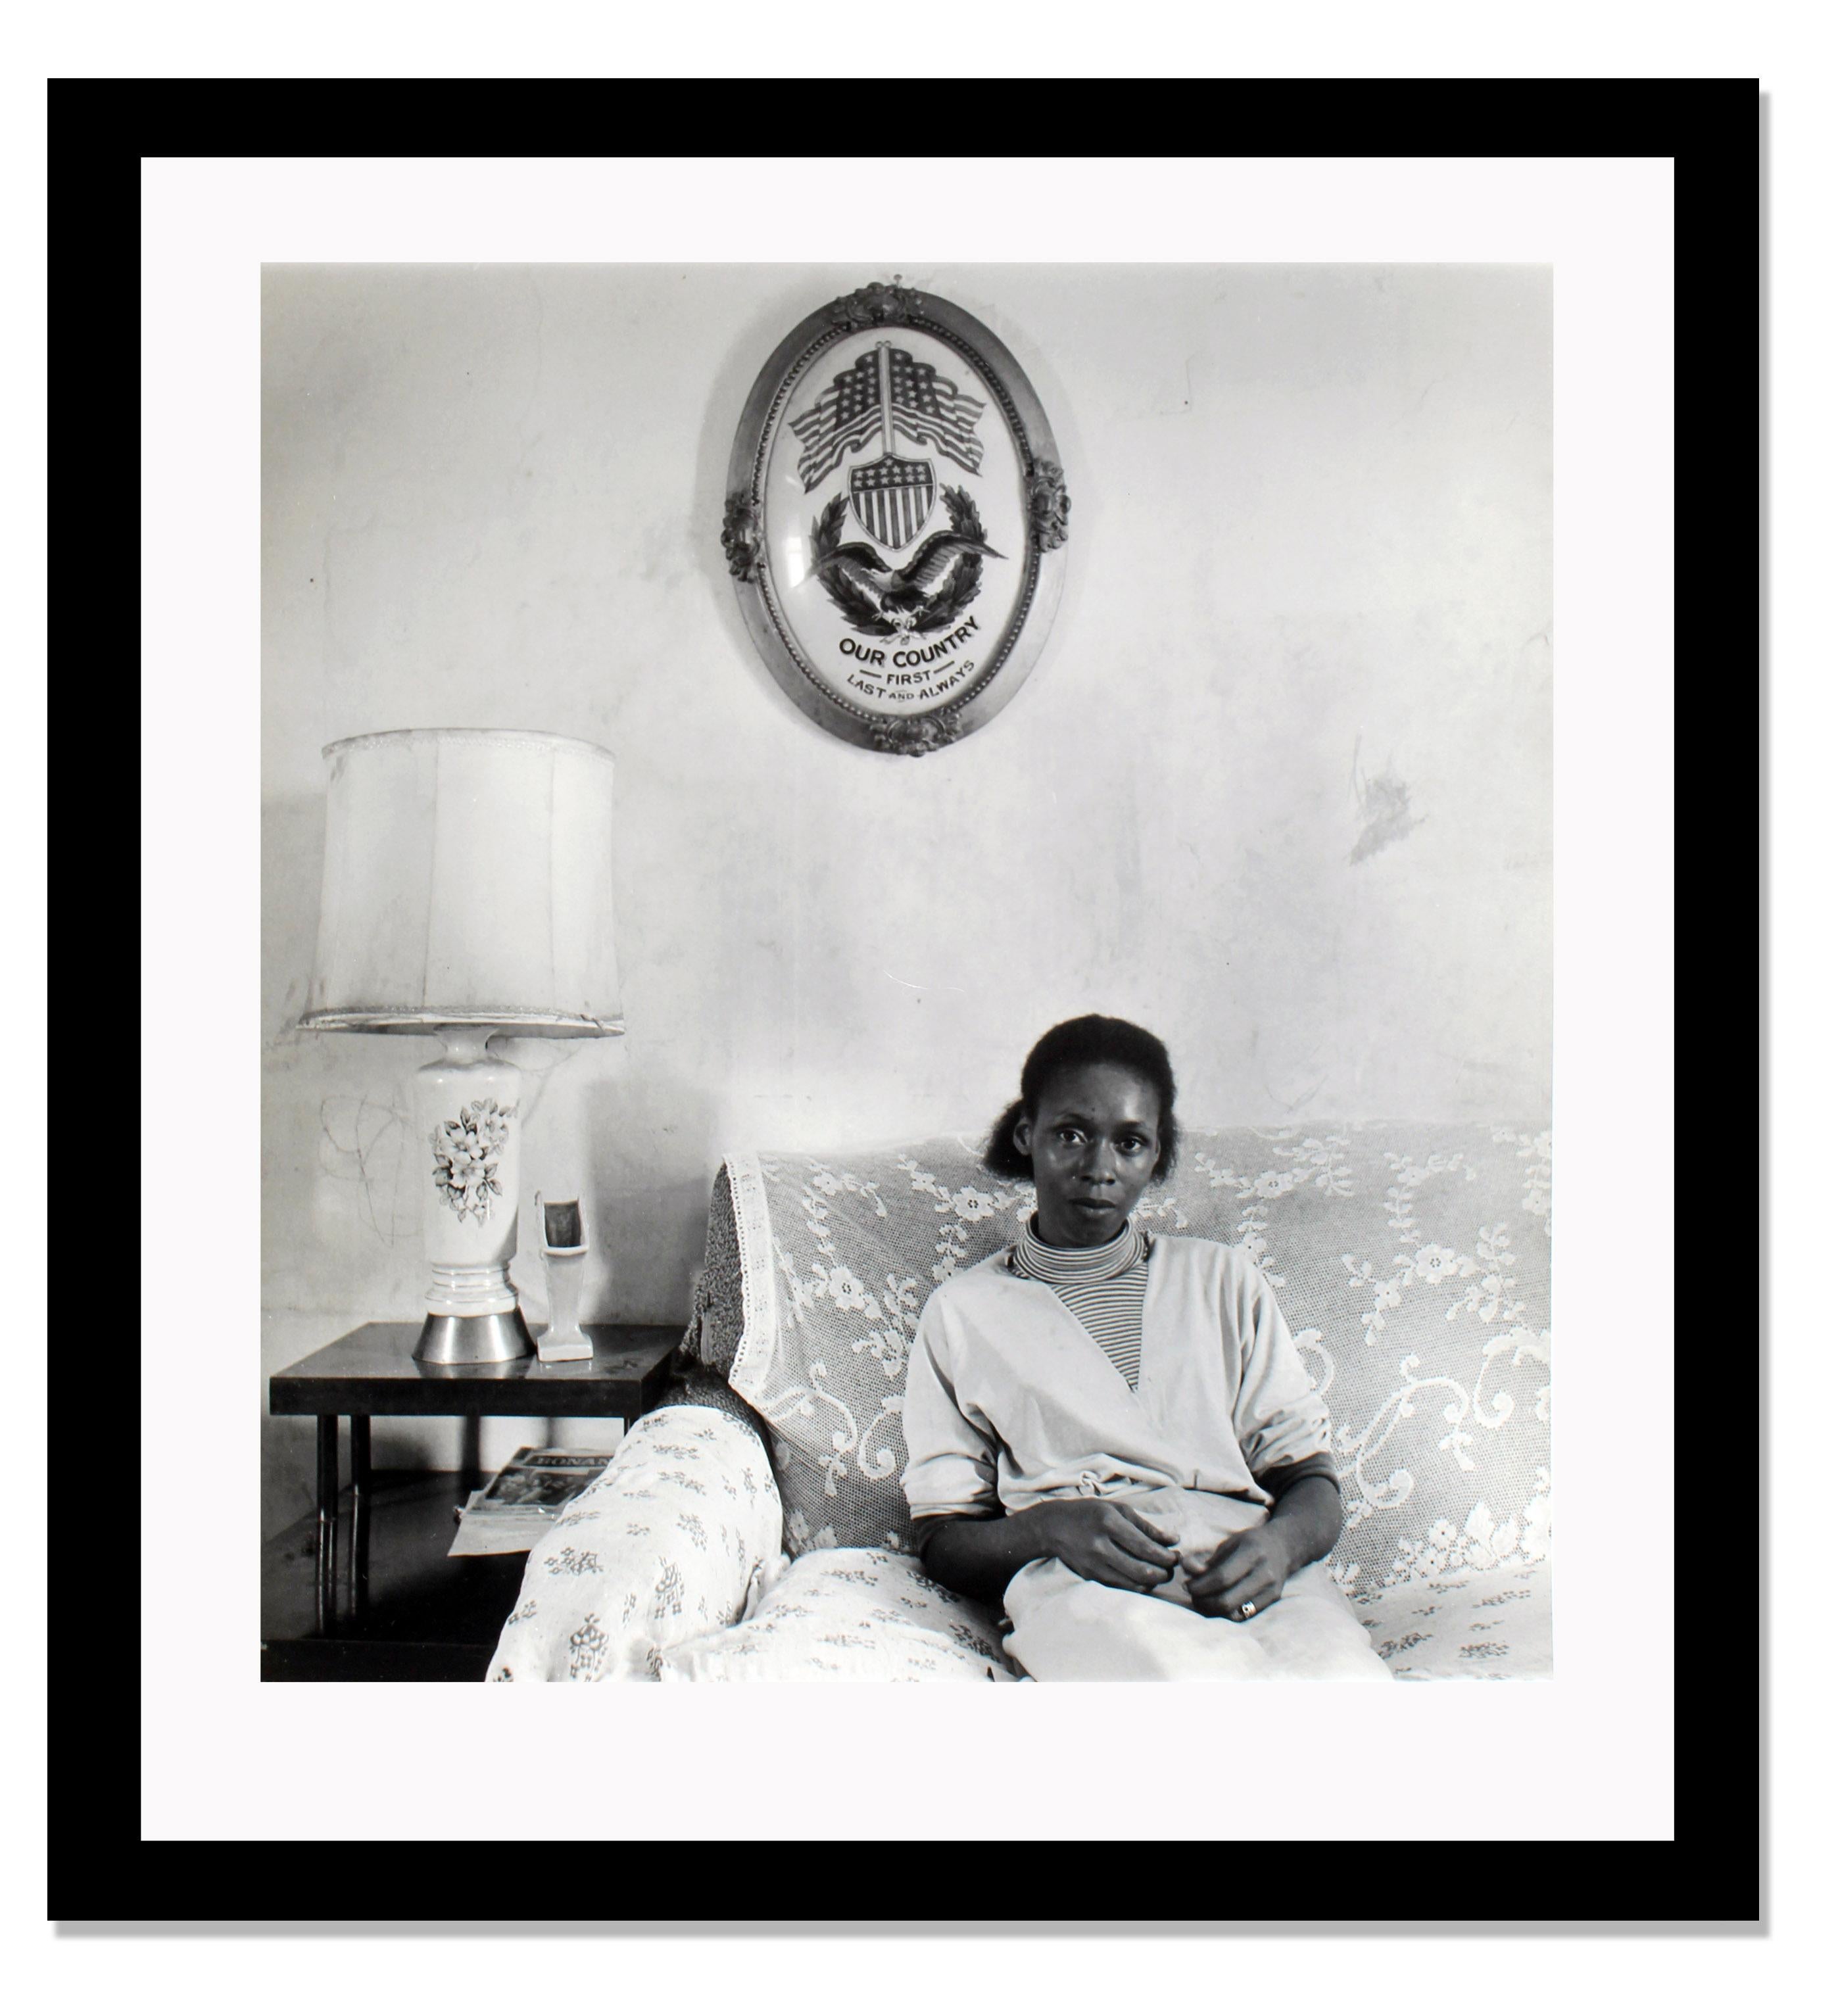 An original gelatin silver print by American social documentary photographer Milton Rogovin depicting a resident of Buffalo's East Side in the early 1960's.  This work is hand signed on the reverse by Rogovin and was created by his hand in the